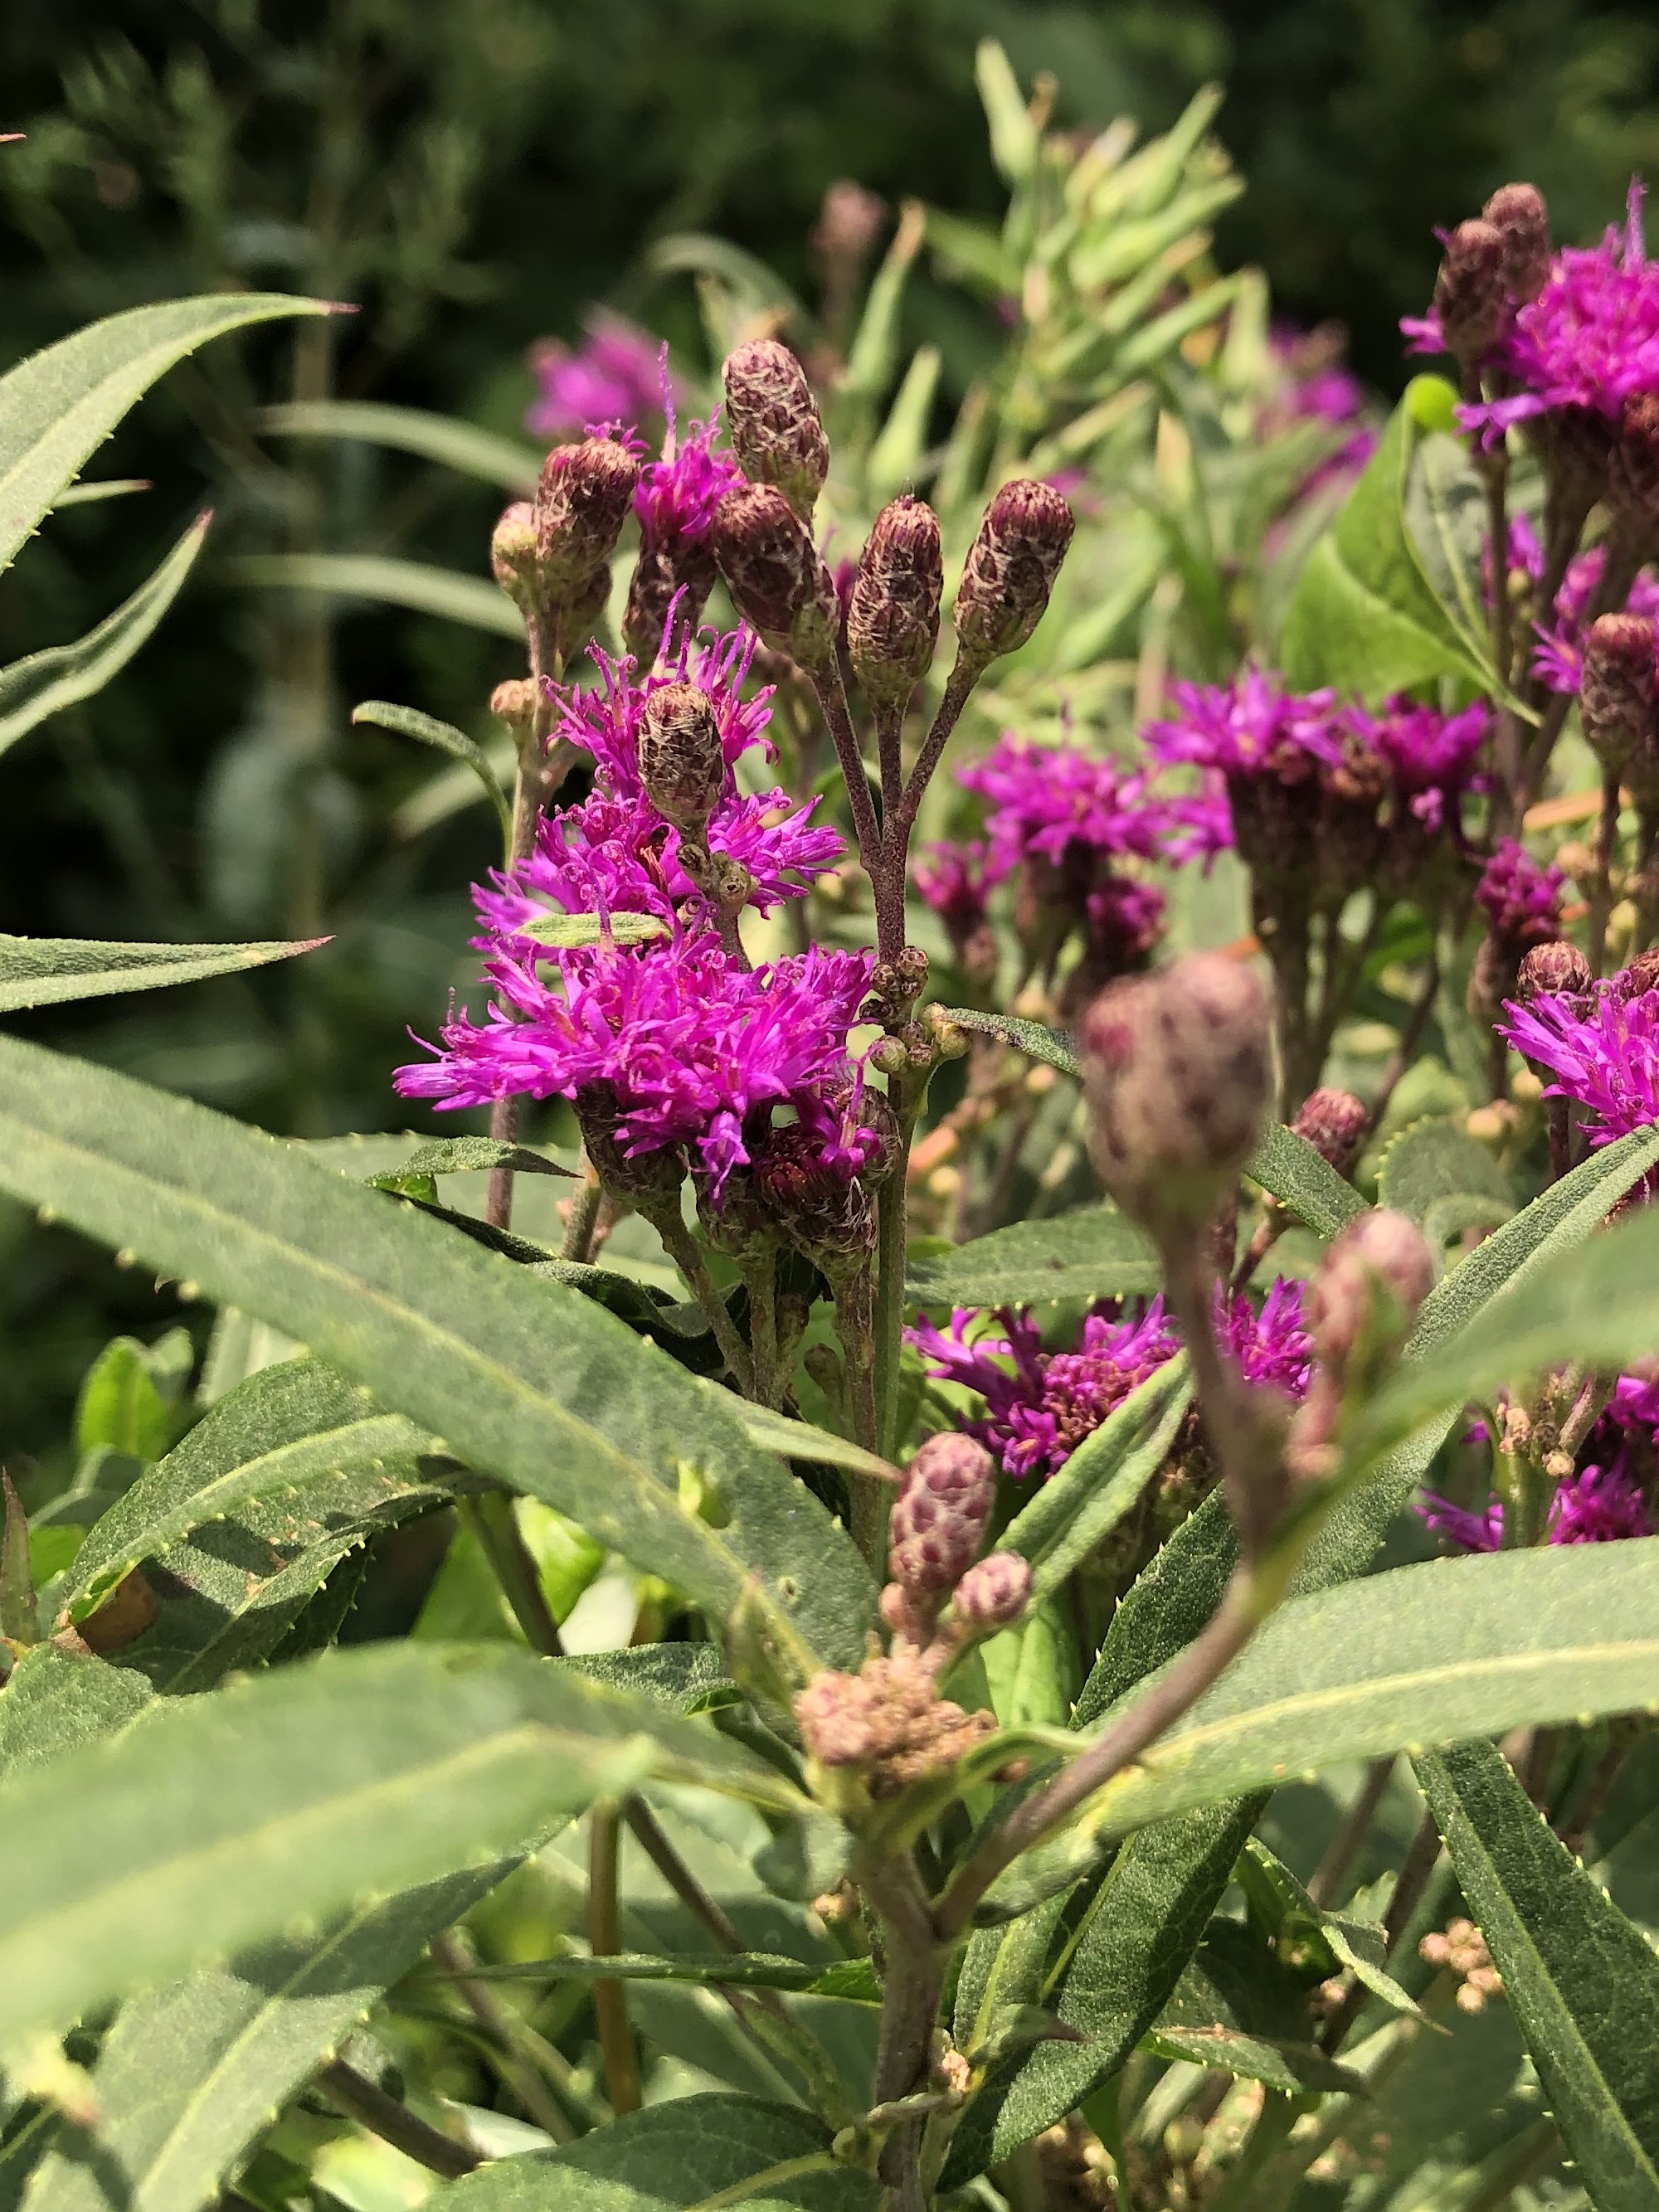 Tall Ironweed along bikepath behind Gregory Street in Madison, Wisconsin on August 2, 2021.